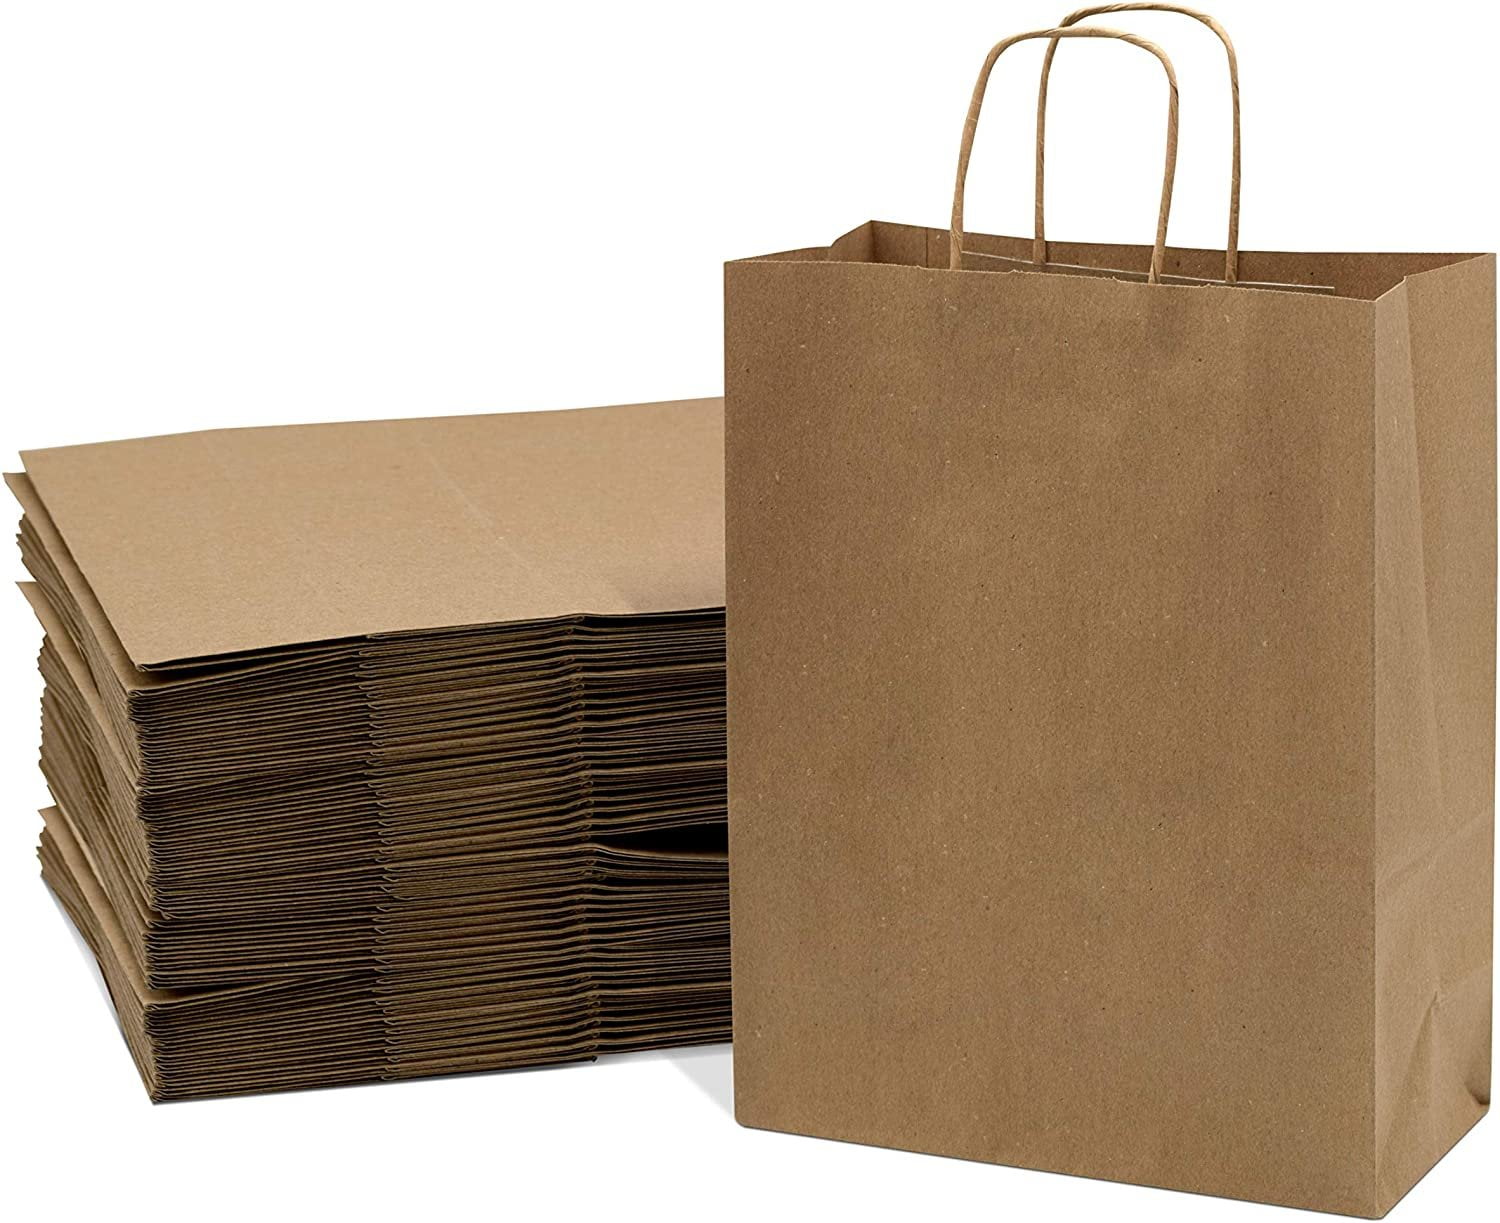 Luxury Christmas Gift Presents Kraft Paper Bags Twisted Handle Strong Fast Deliv